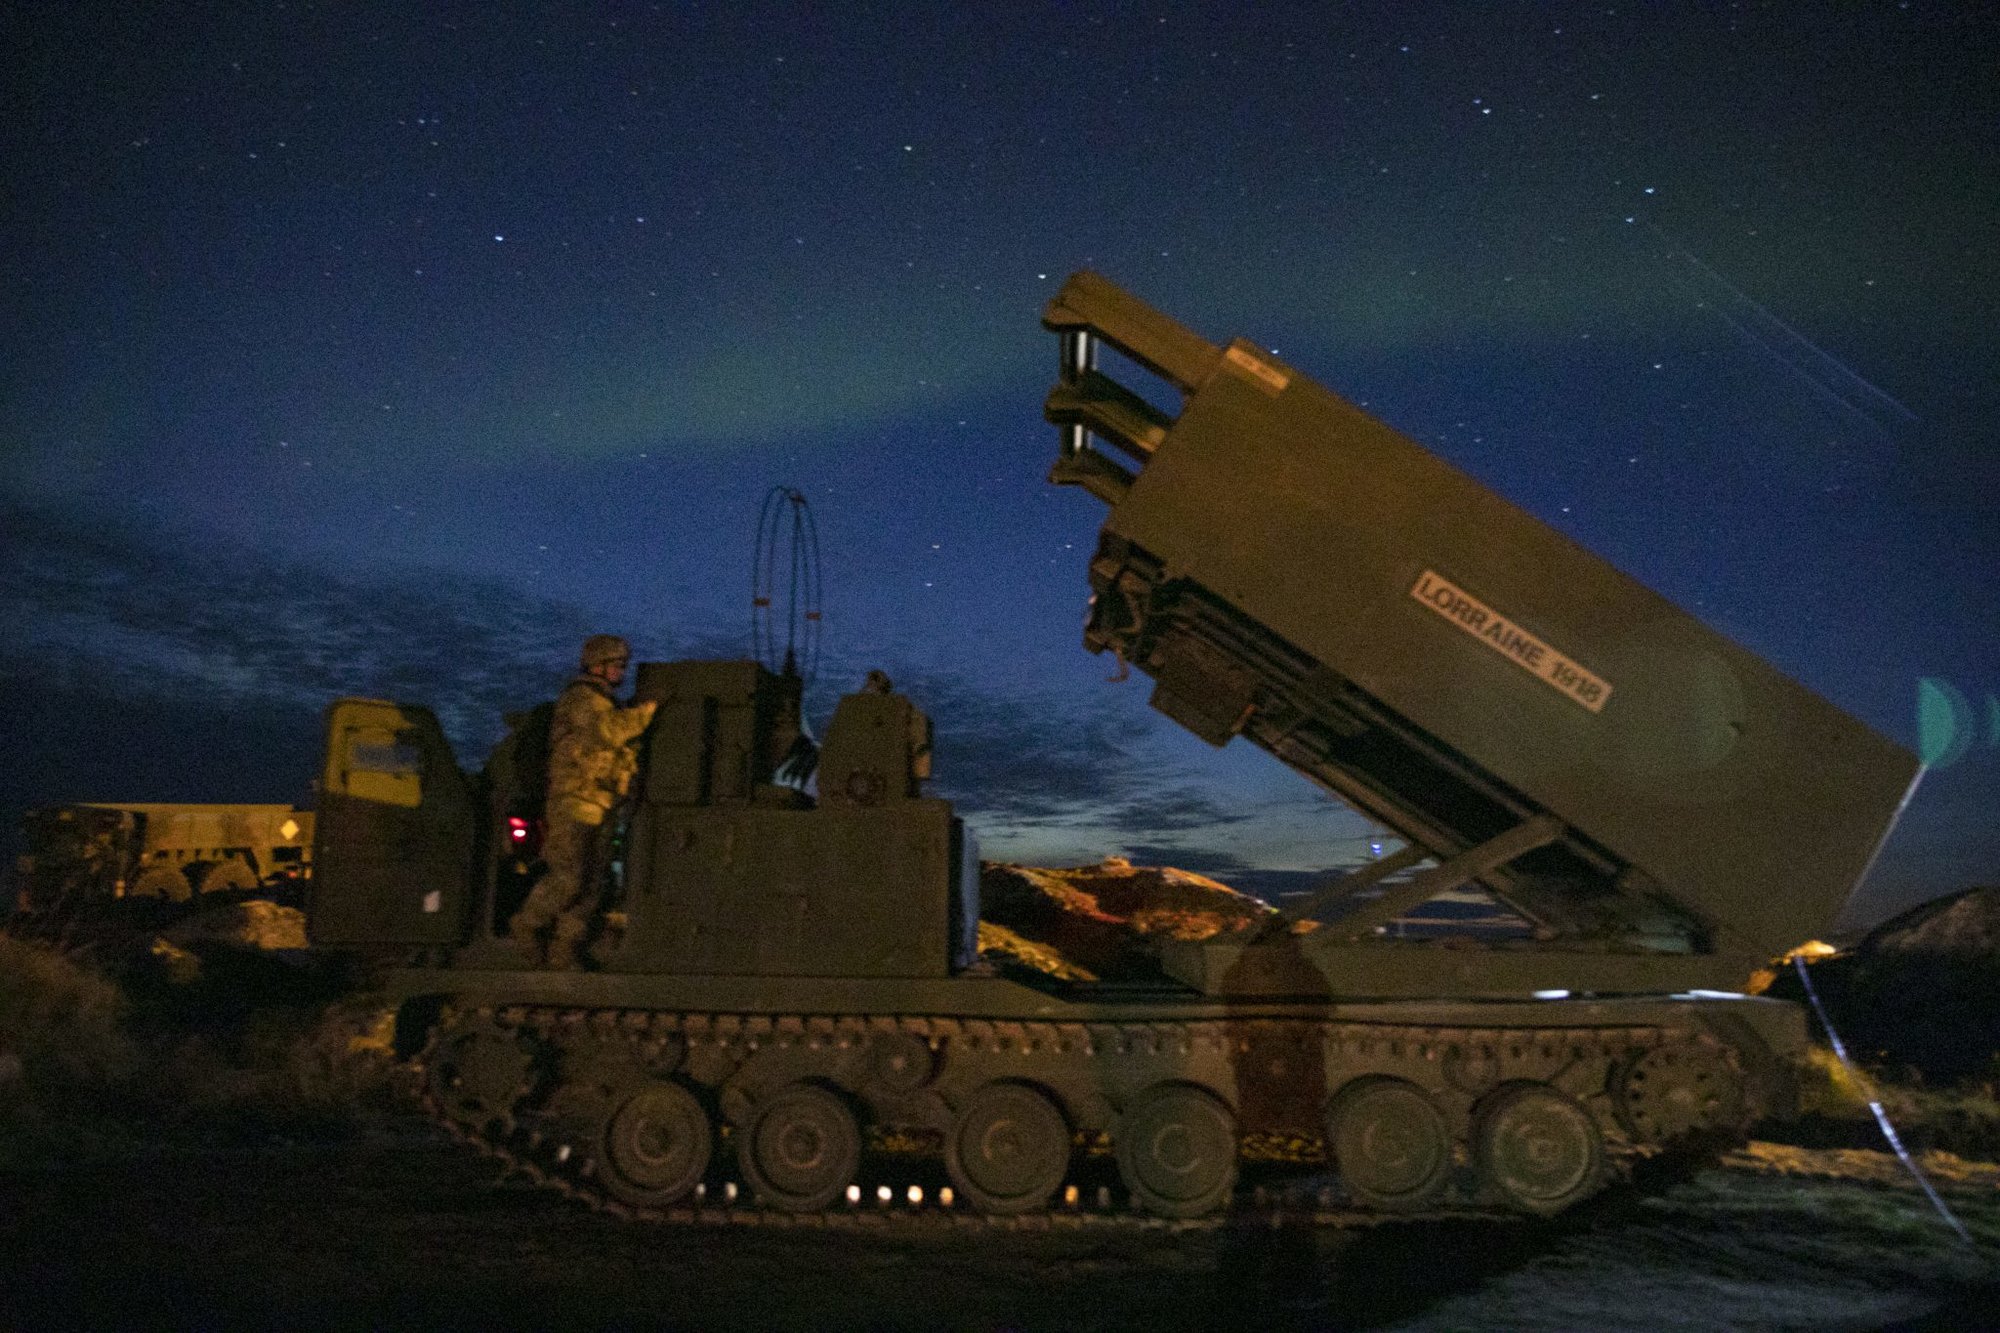 R9E Hellfire missile, M31 Guided Multiple Launch Rocket Systems